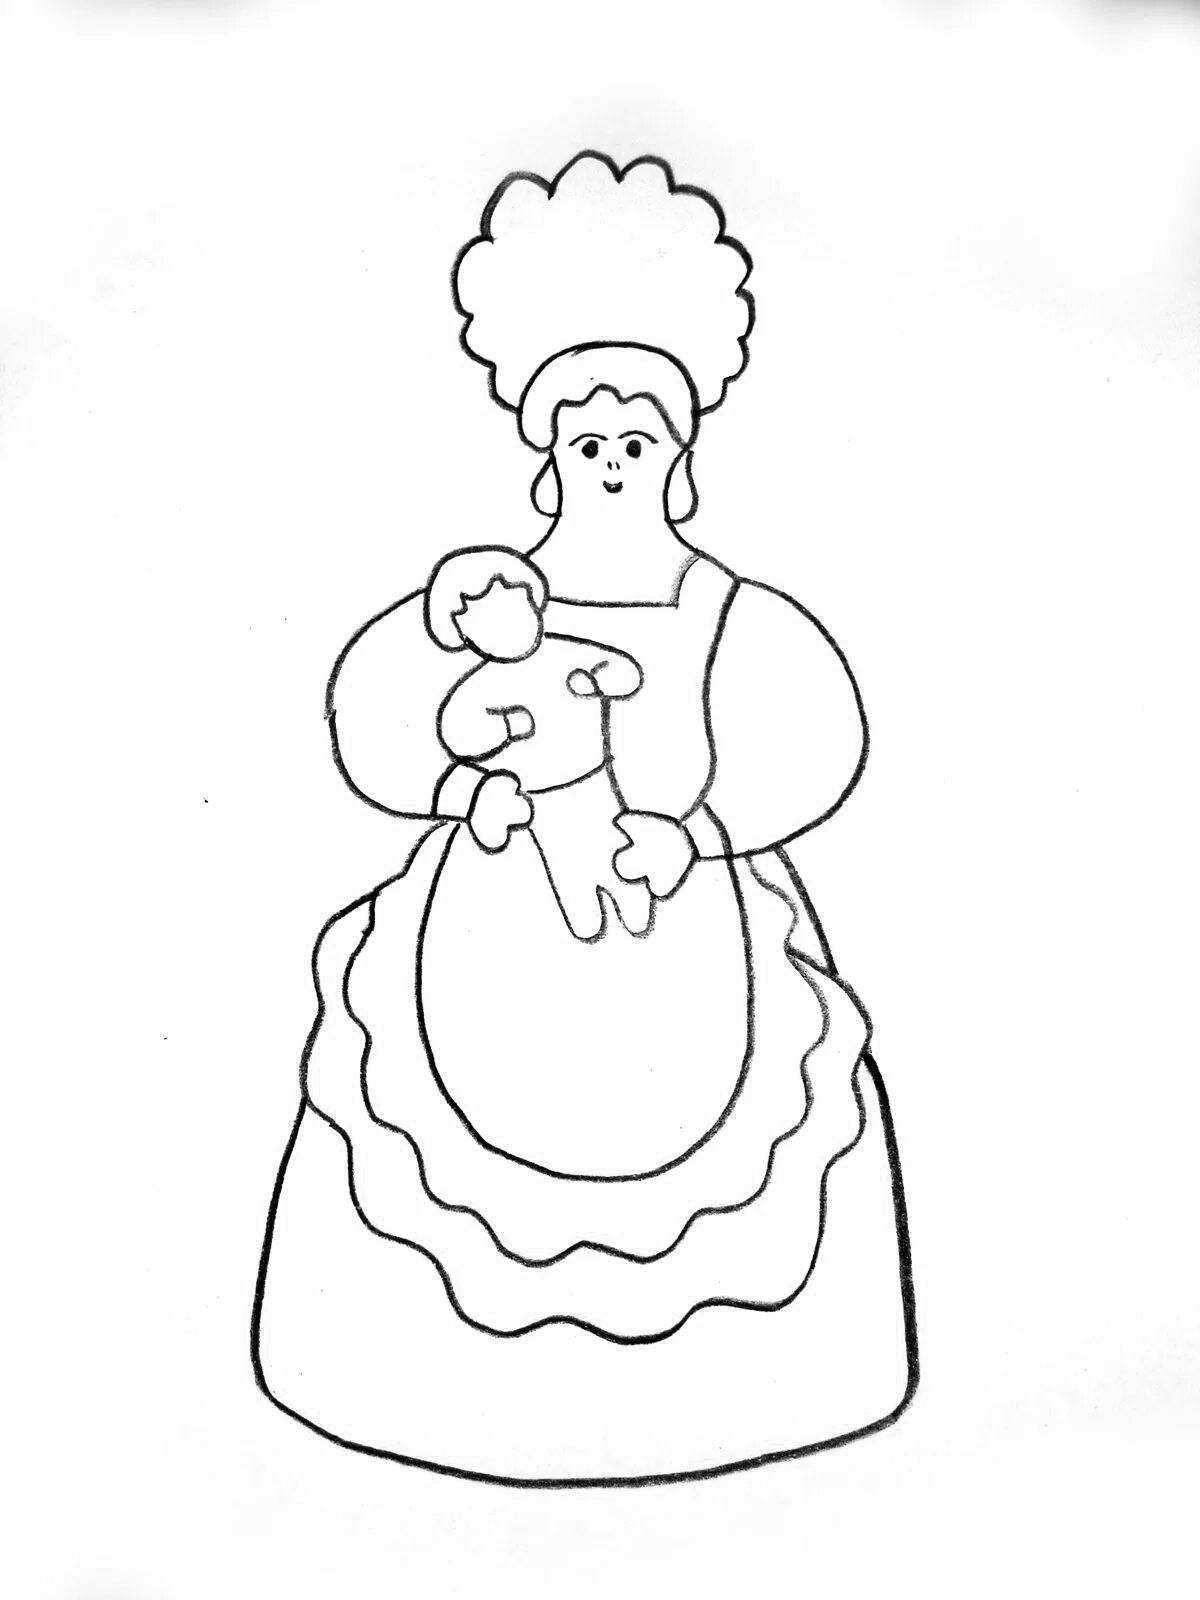 Coloring page gorgeous Dymkovo doll